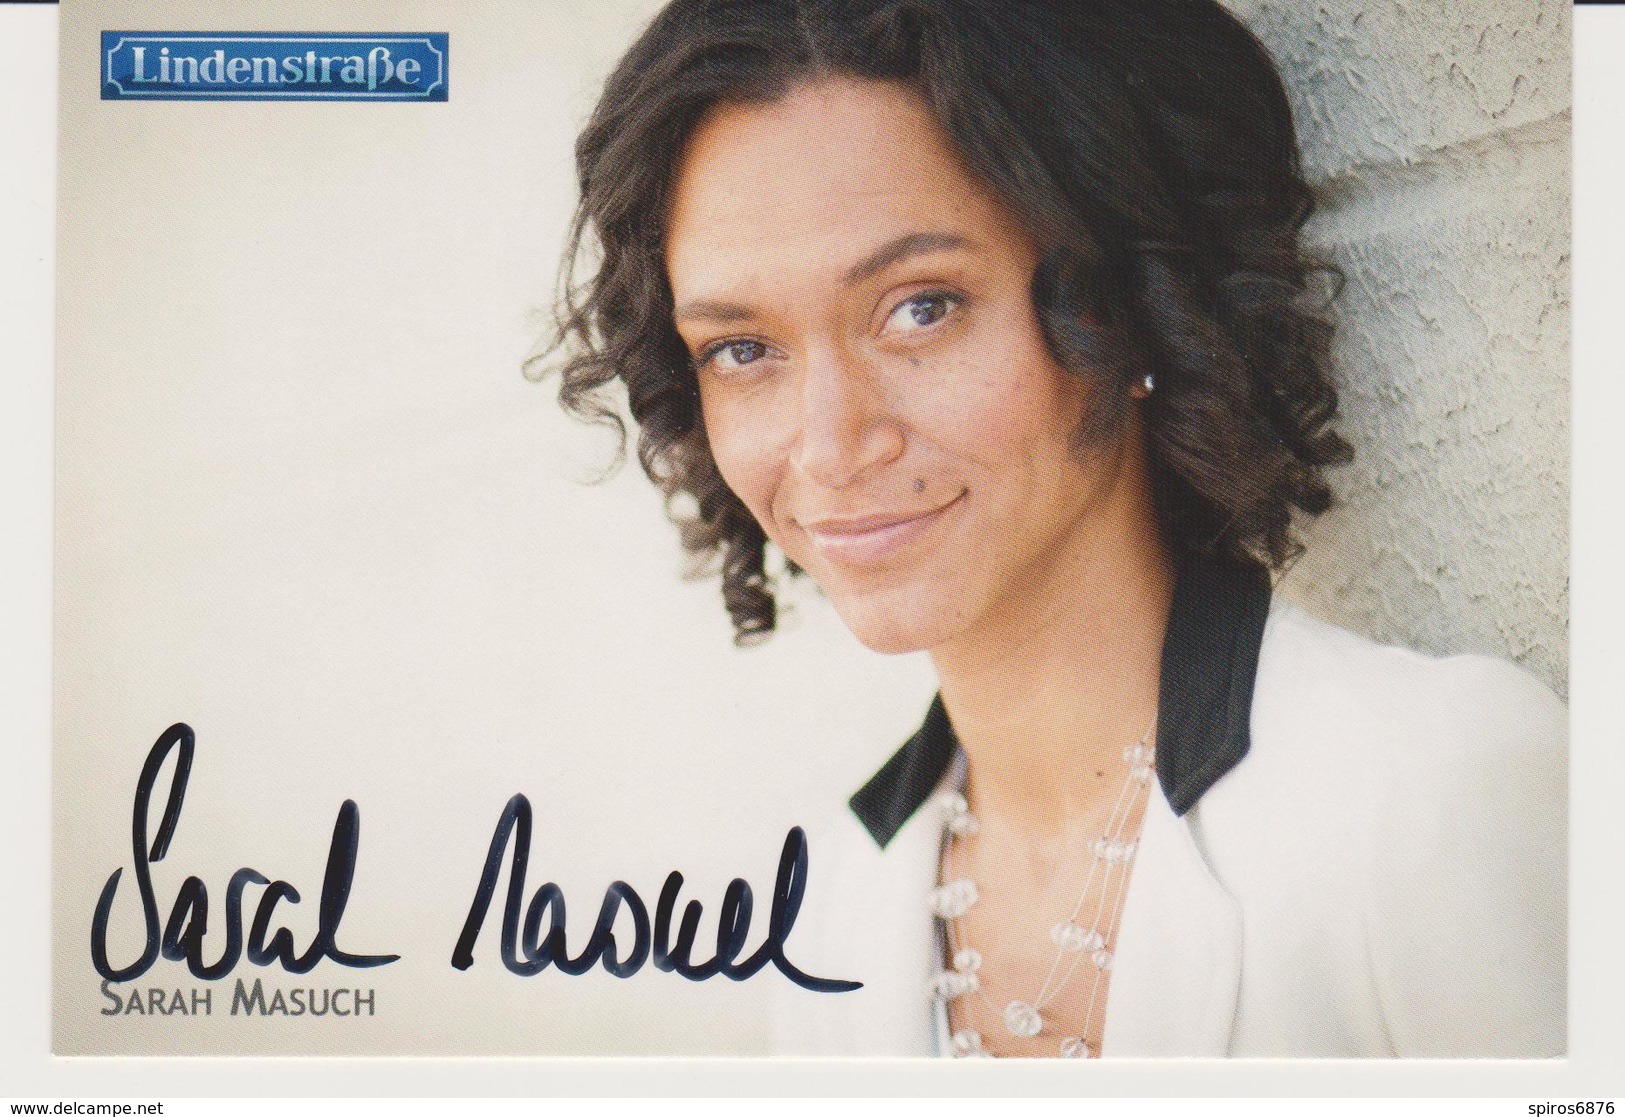 Authentic Signed Card / Autograph -  Actress SARAH MASUCH - German TV Series Lindenstrasse - Autogramme